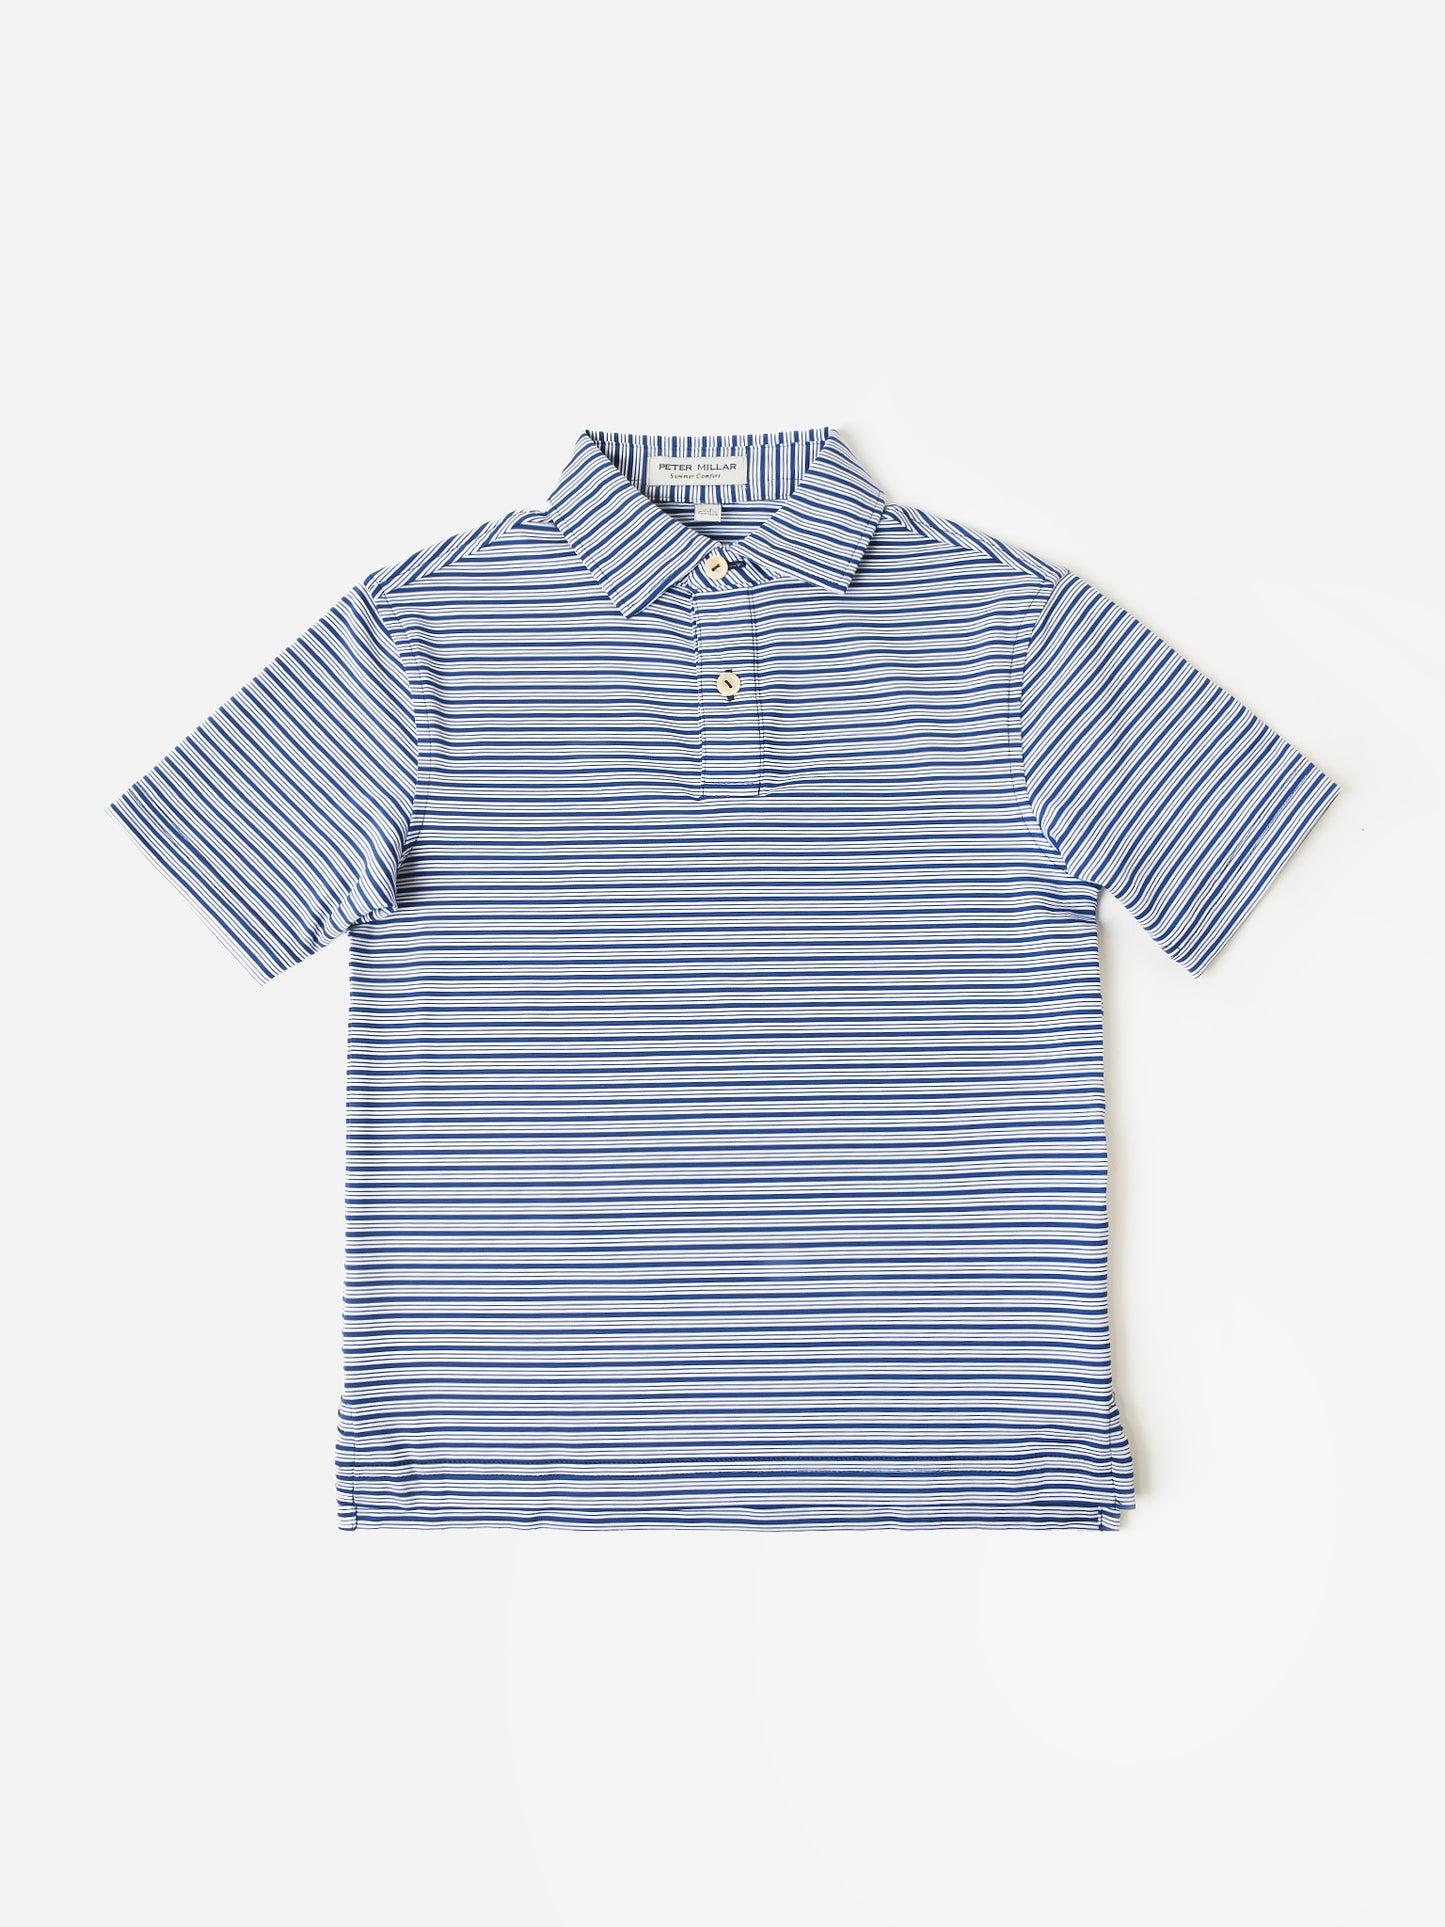 Peter Millar Youth Collection Boys' Heritage Performance Jersey Polo